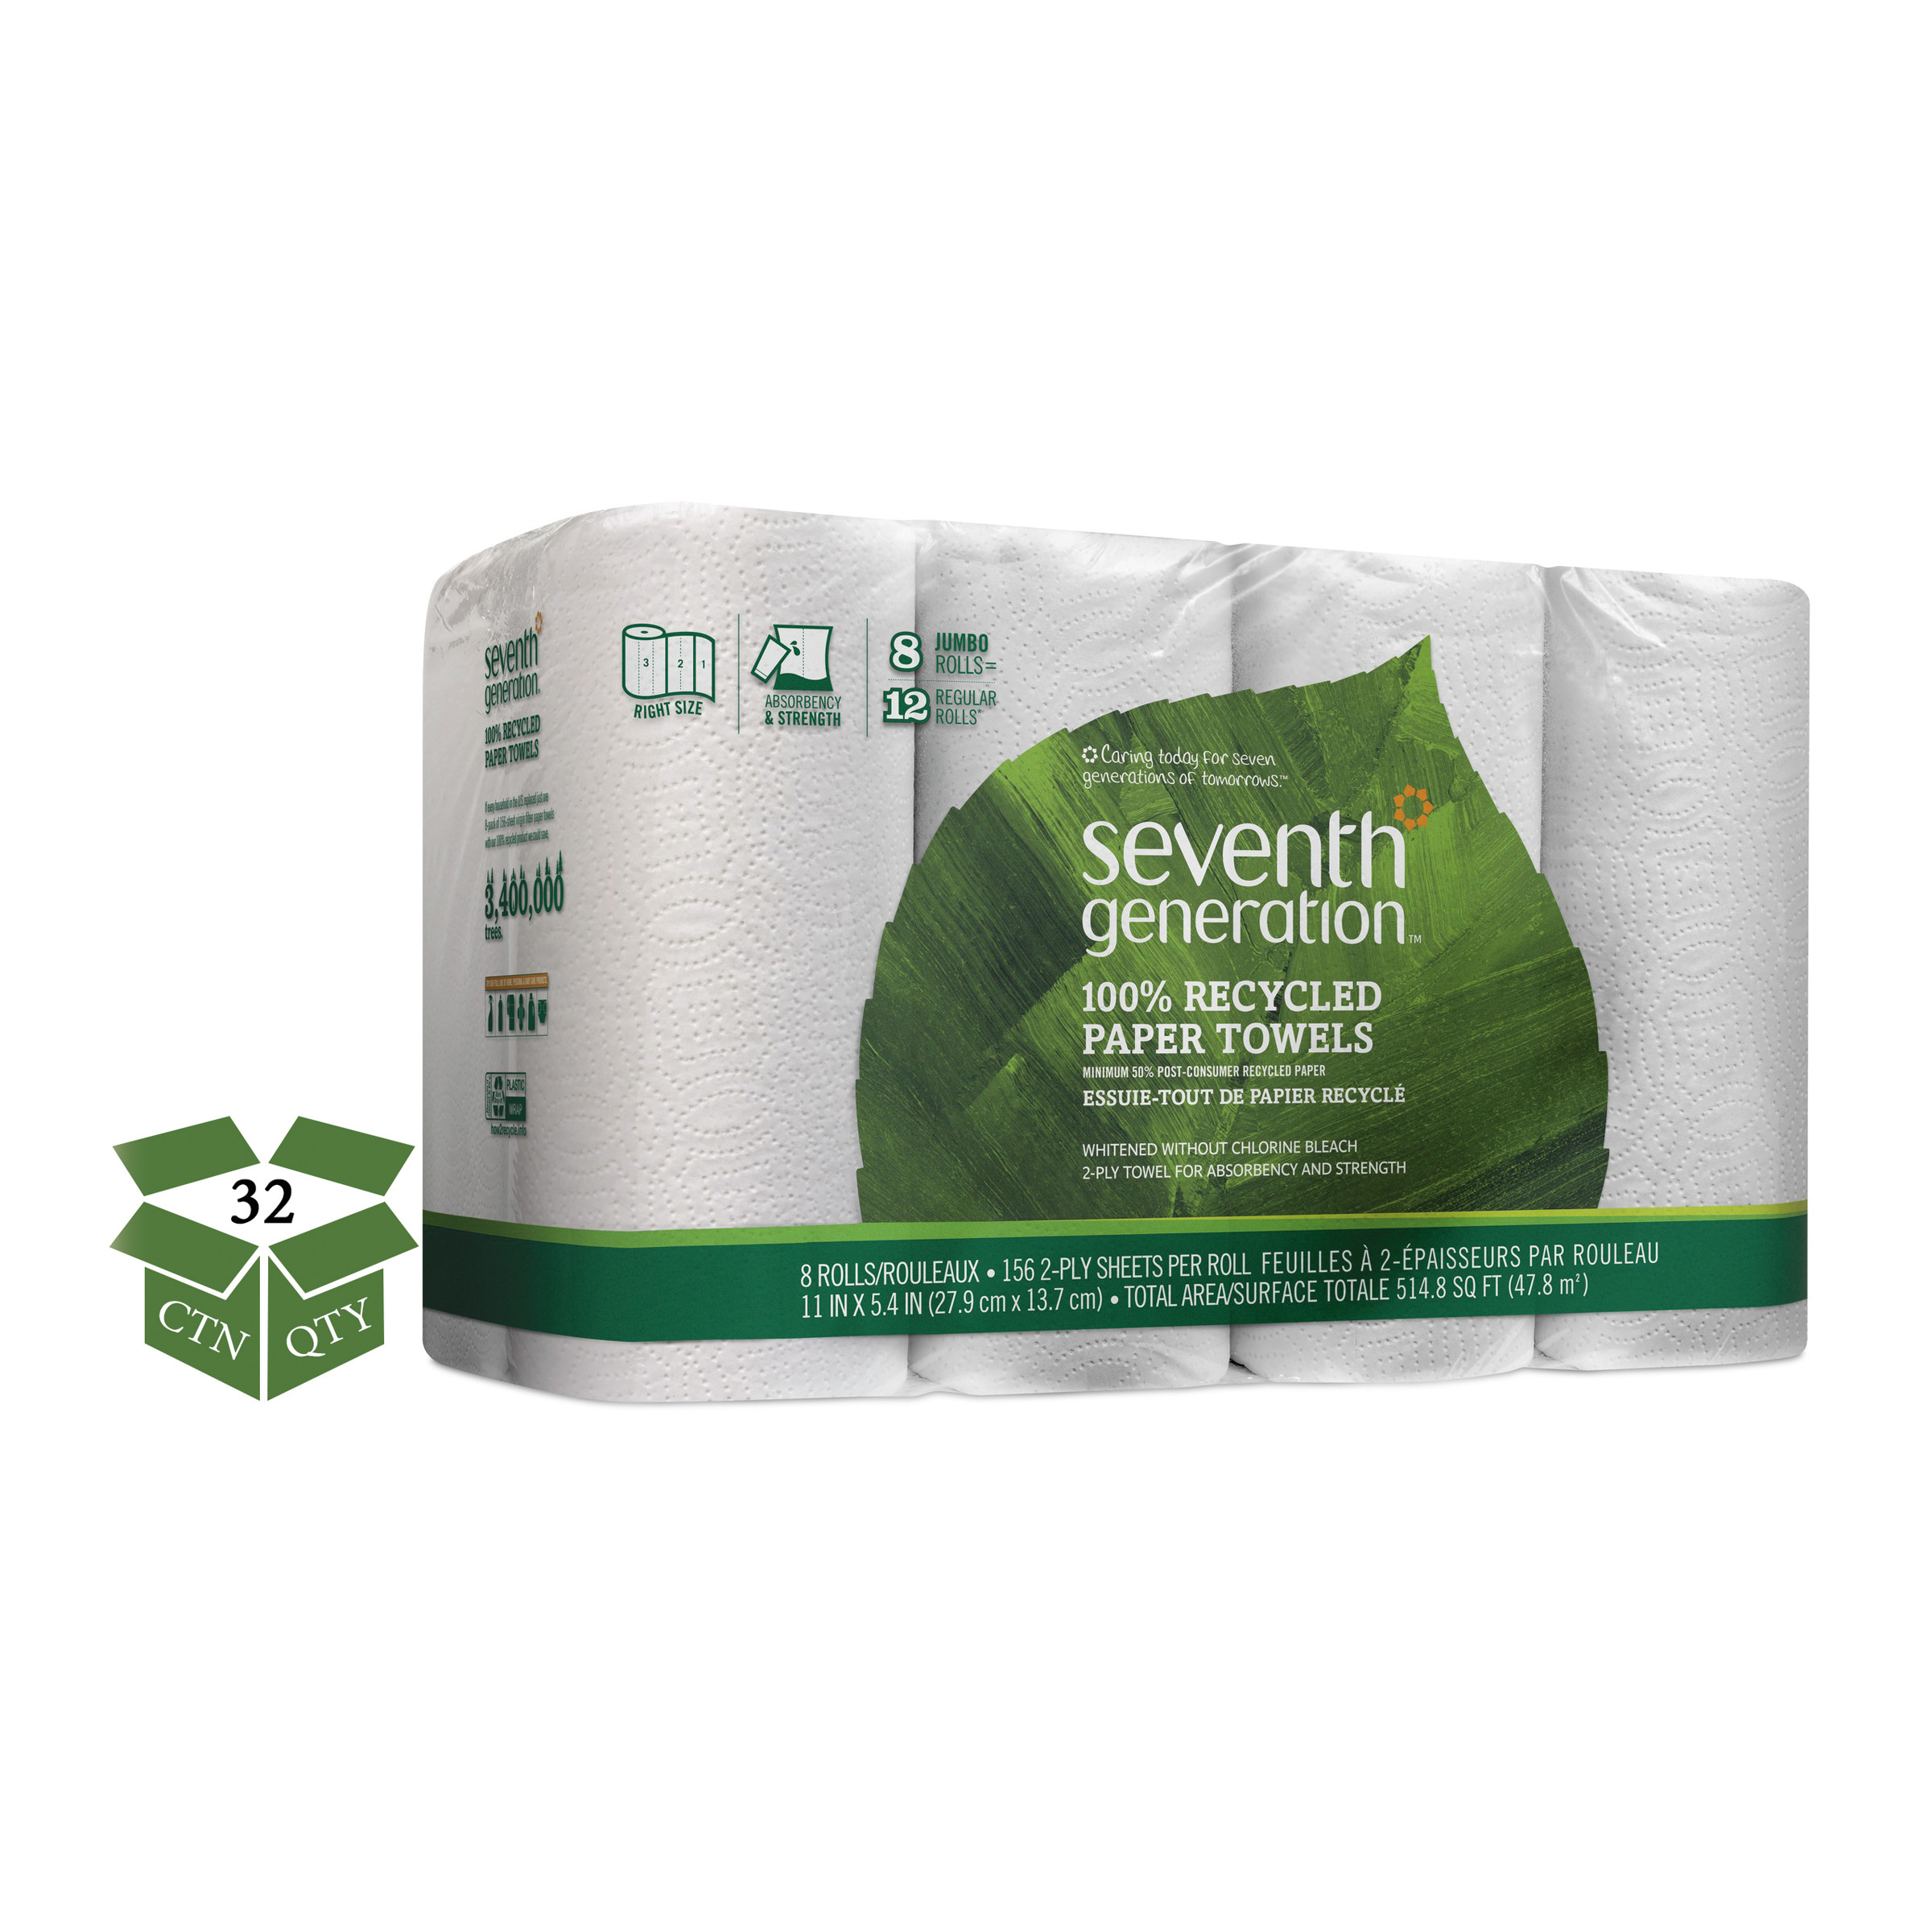 Seventh Generation 100% Recycled Paper Towel Rolls, 2-Ply, 11 x 5.4 Sheets, 156 Sheets/RL, 32RL/CT - image 1 of 2